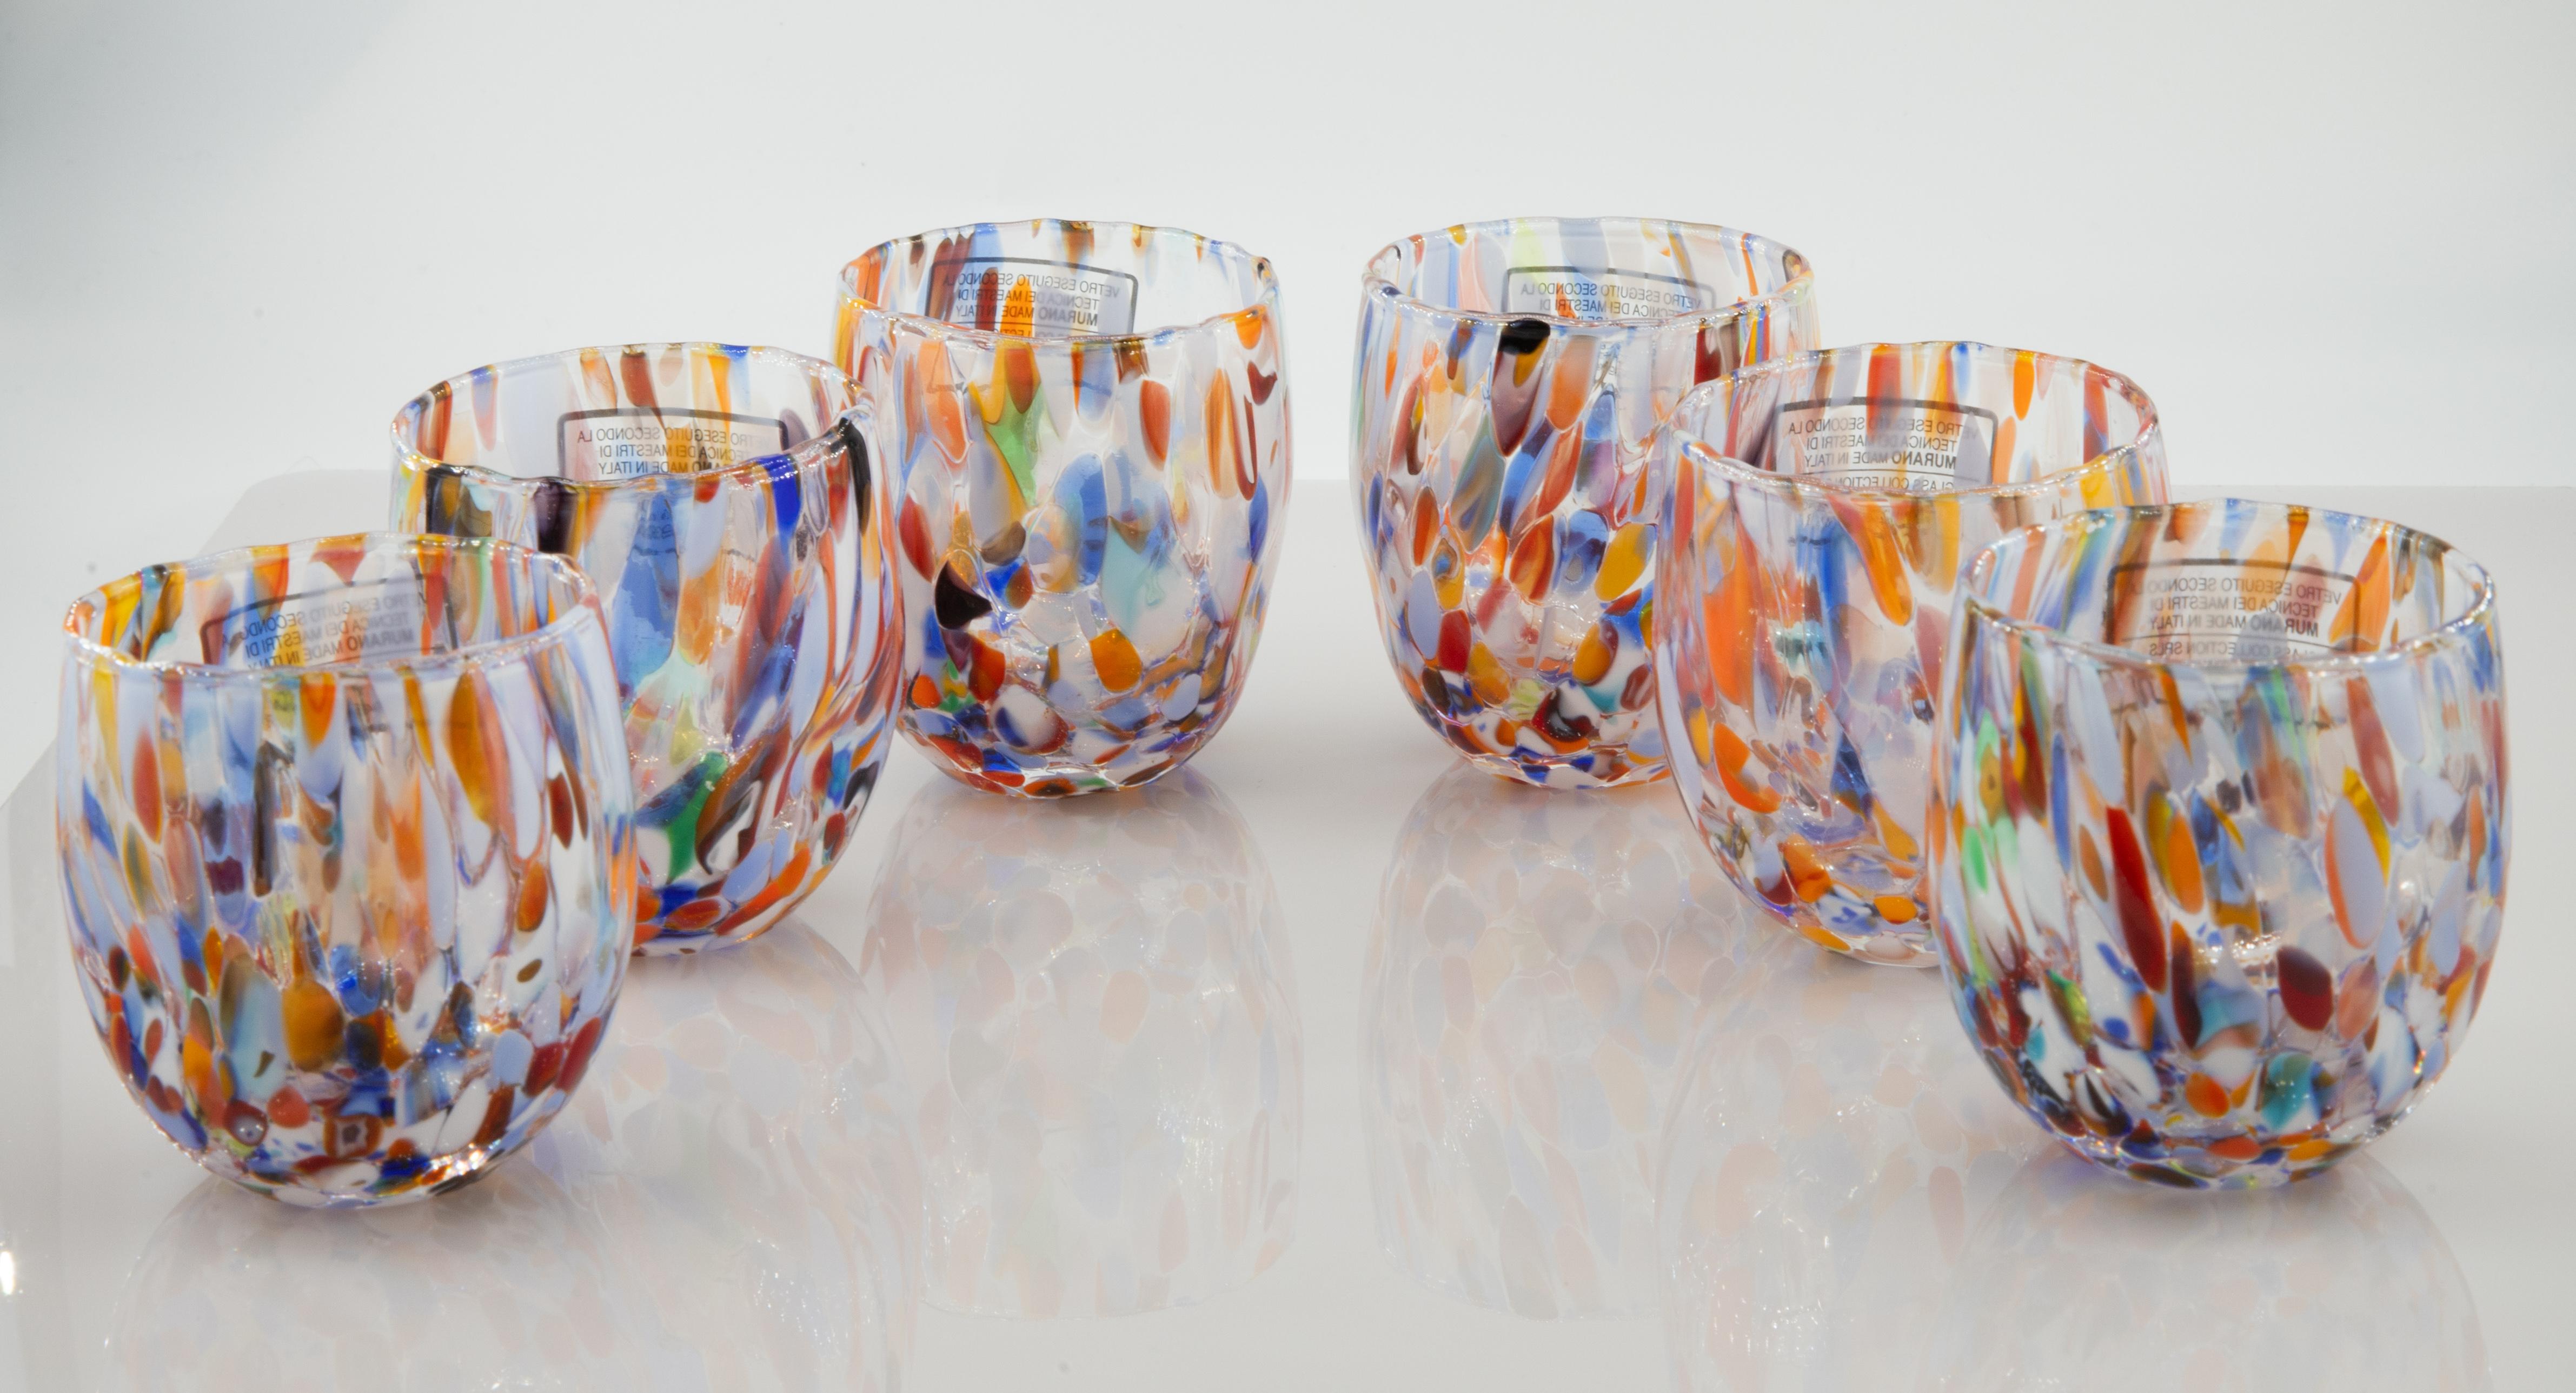 Set of six shot\café glasses color Millefiori - Murano glass - Made in Italy.

These individual Murano glasses are inspired by the classic 